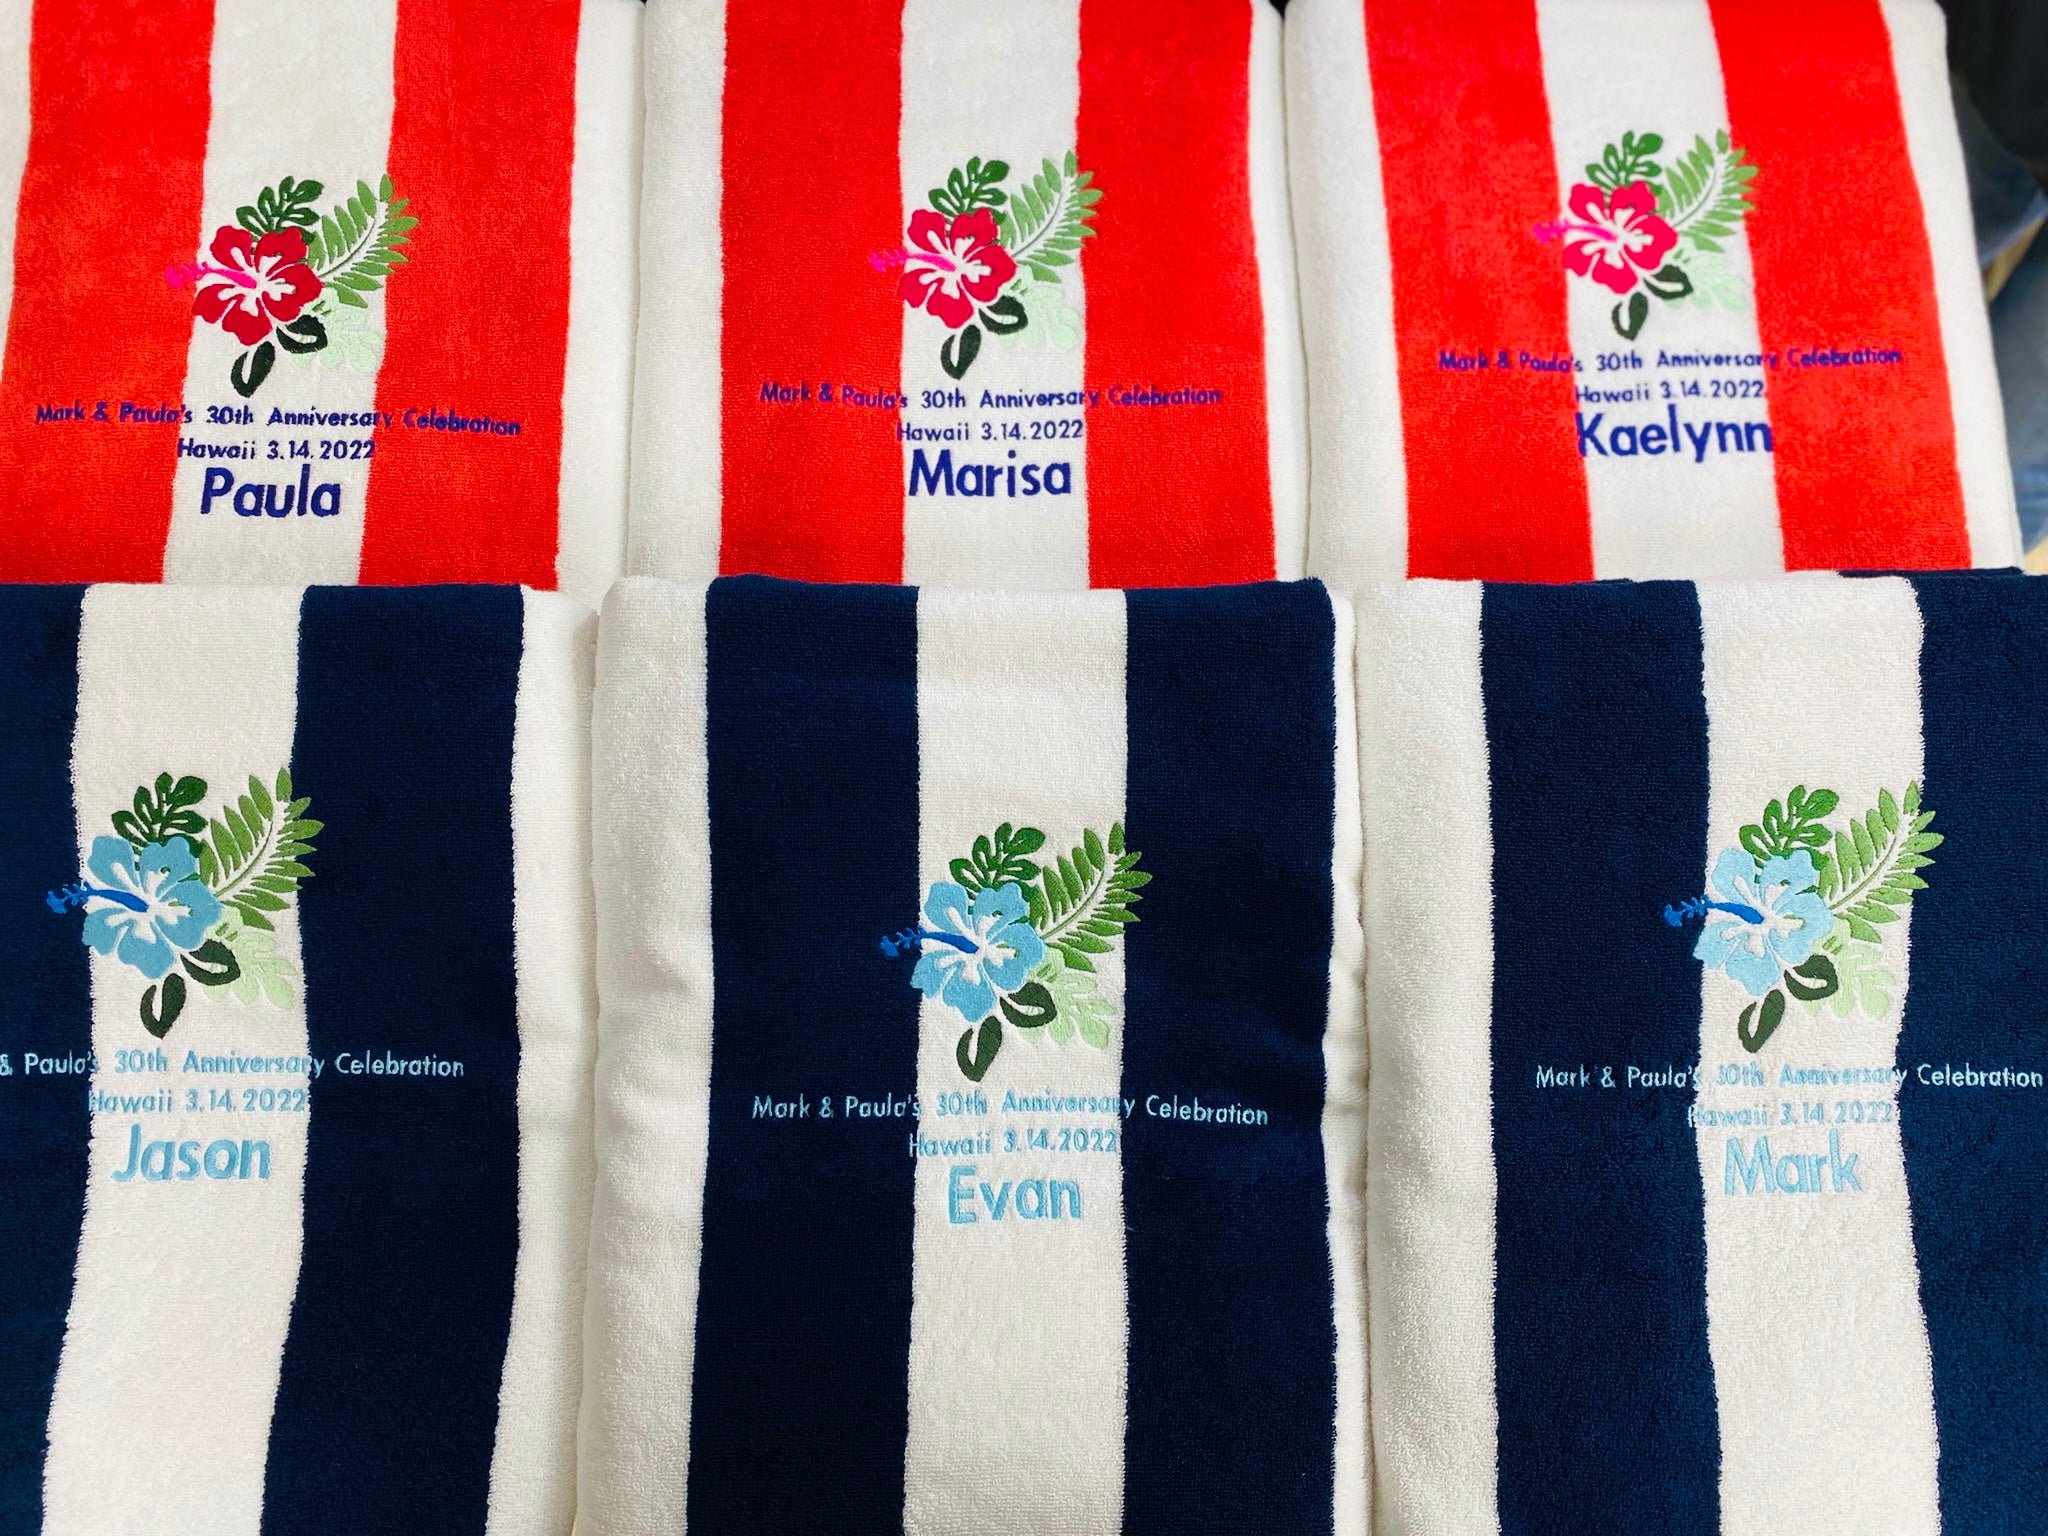 Personalized Cabana Beach and Pool Towels for an Anniversary Event in Hawaii